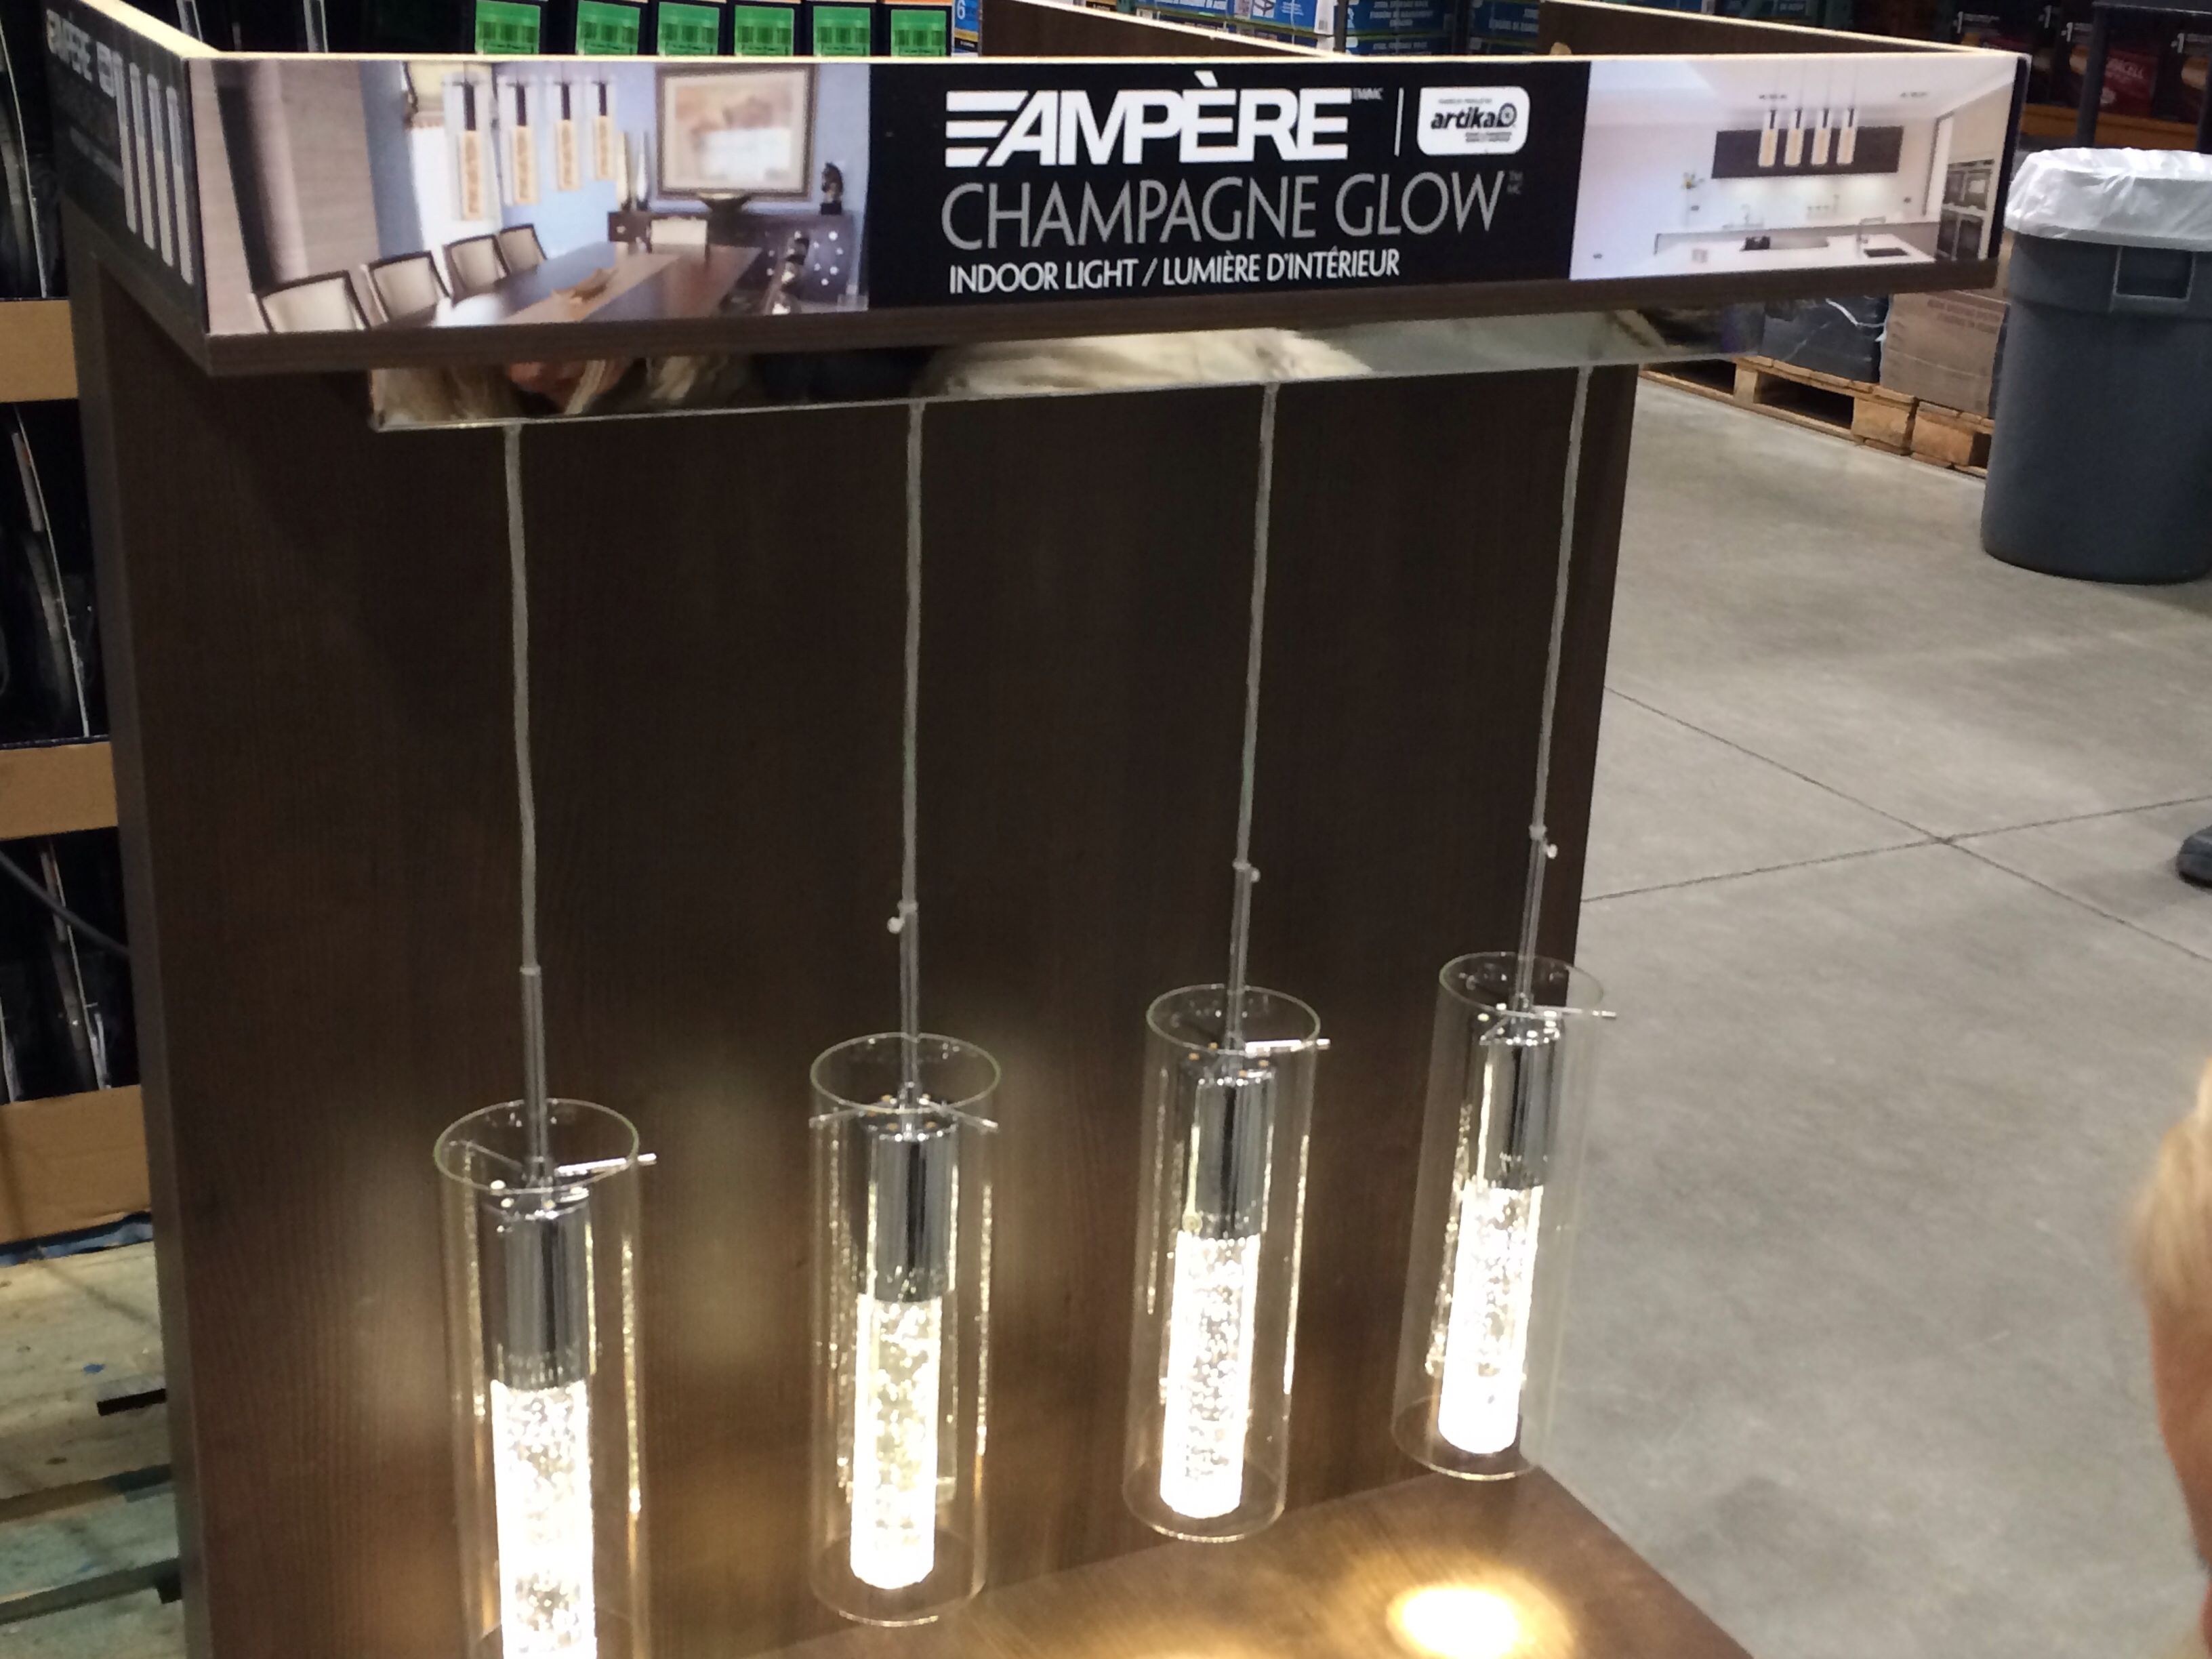 Costco Ampre Champagne Glow Indoor Light Would Look Amazing Throughout Costco Lighting Chandeliers (Photo 2 of 14)